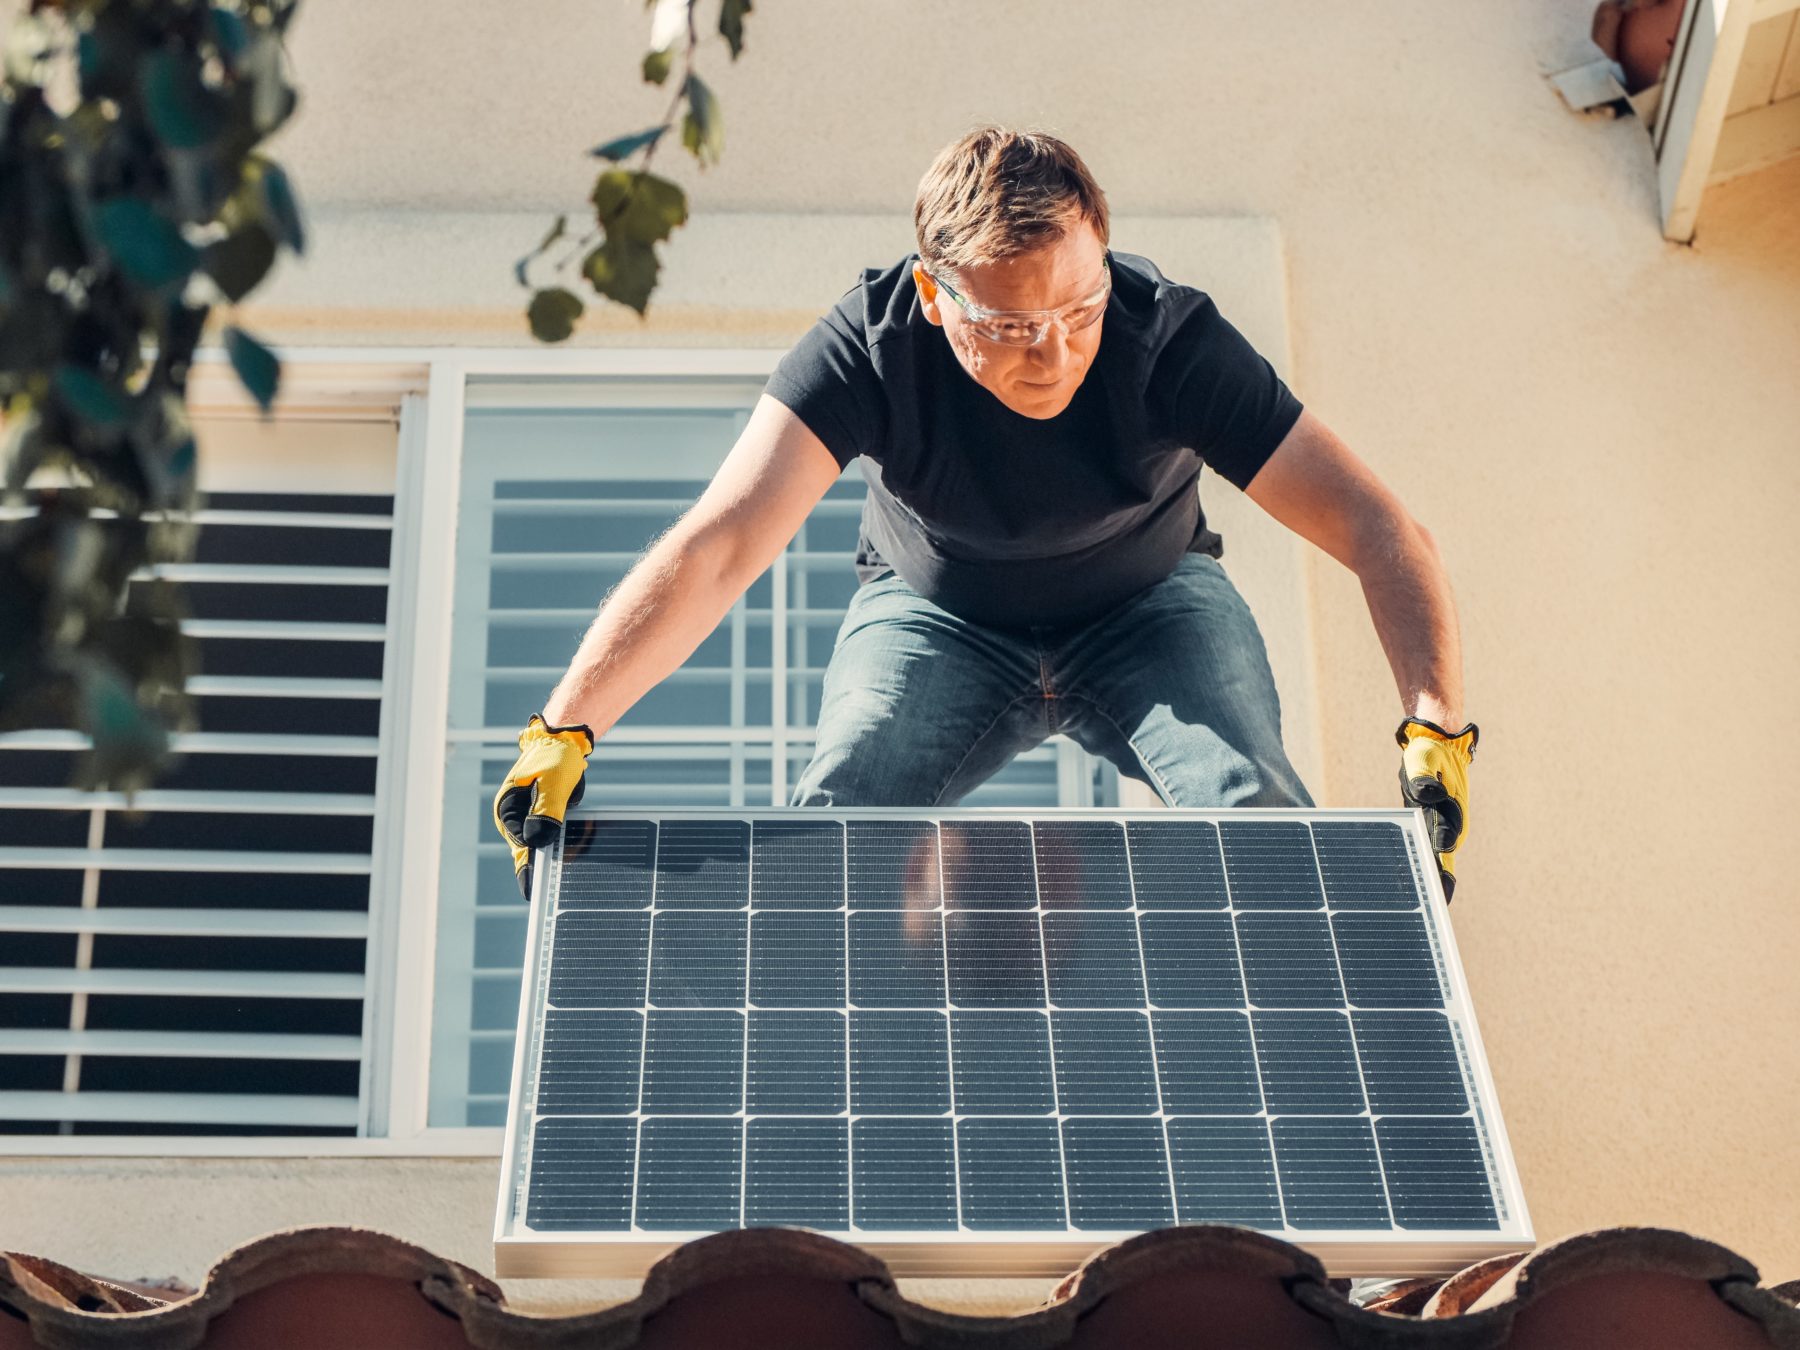 A man with a solar panel (relevant for SunPeople project). Available on Pexels.com, provided by Kindel Media.